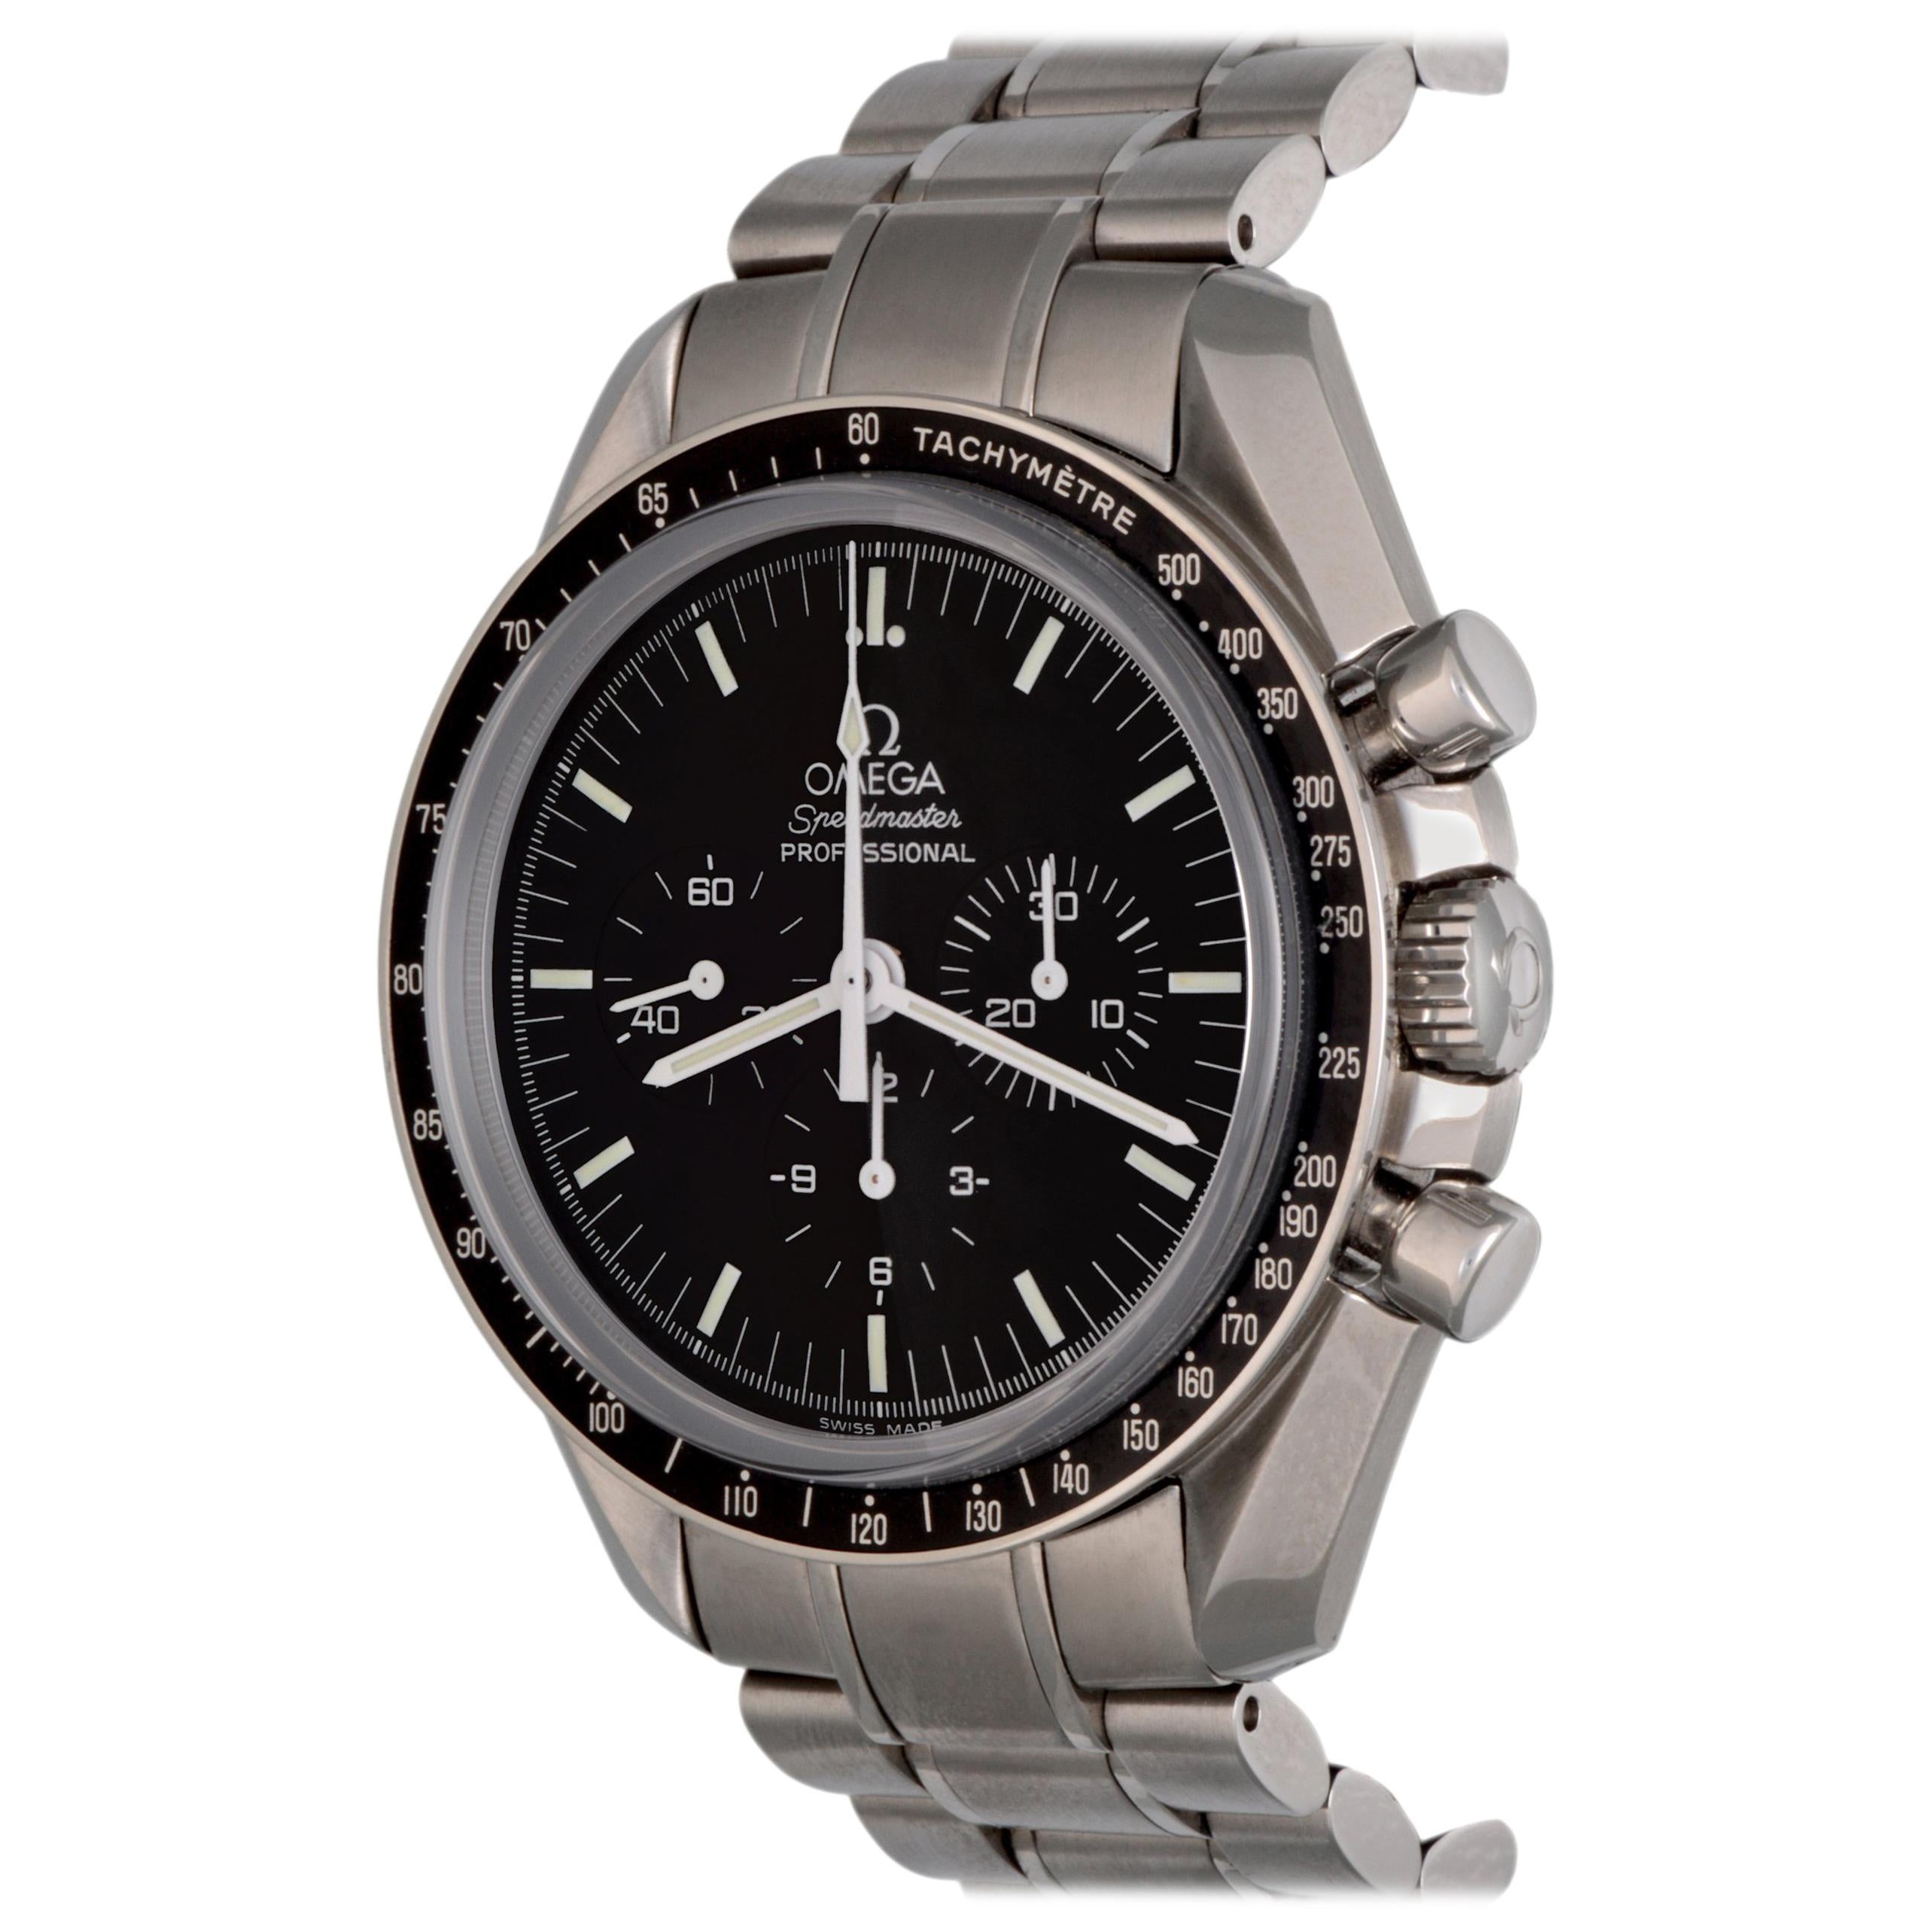 Omega Stainless Steel Speedmaster Professional Chronograph Manual Wristwatch